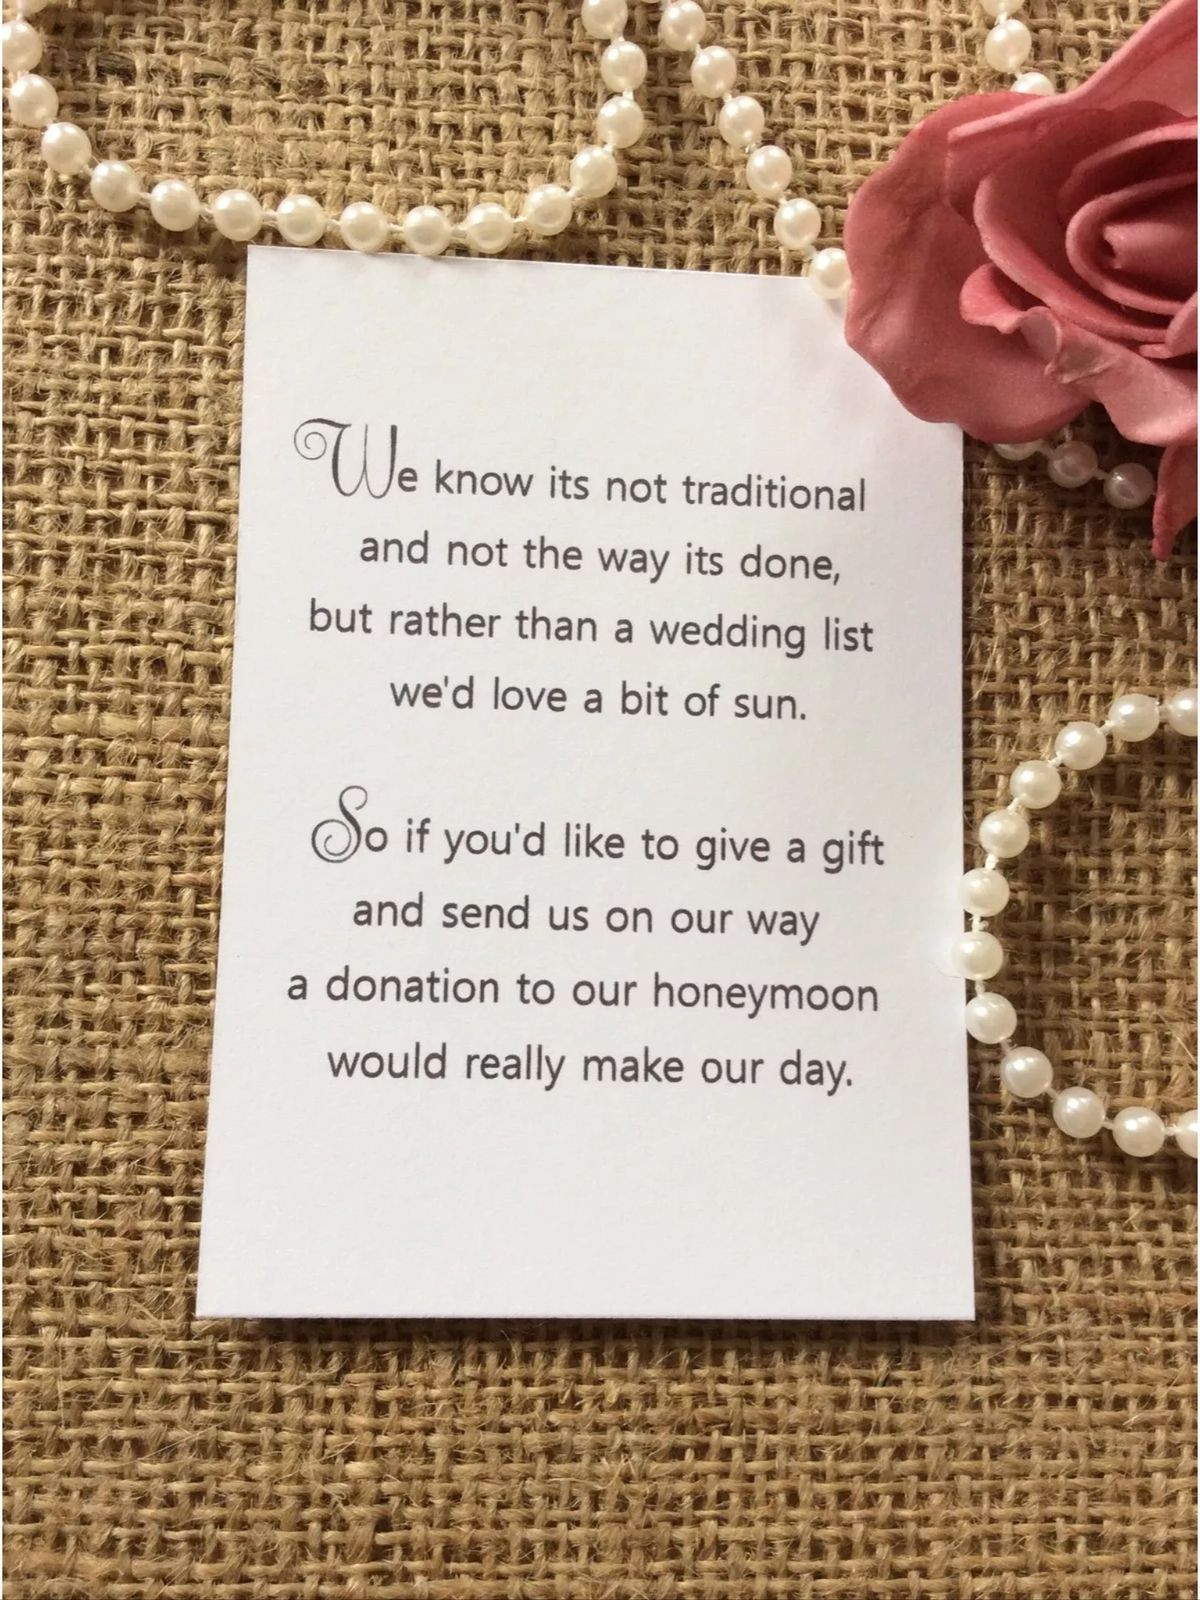 What To Give As A Wedding Gift
 25 50 WEDDING GIFT MONEY POEM SMALL CARDS ASKING FOR